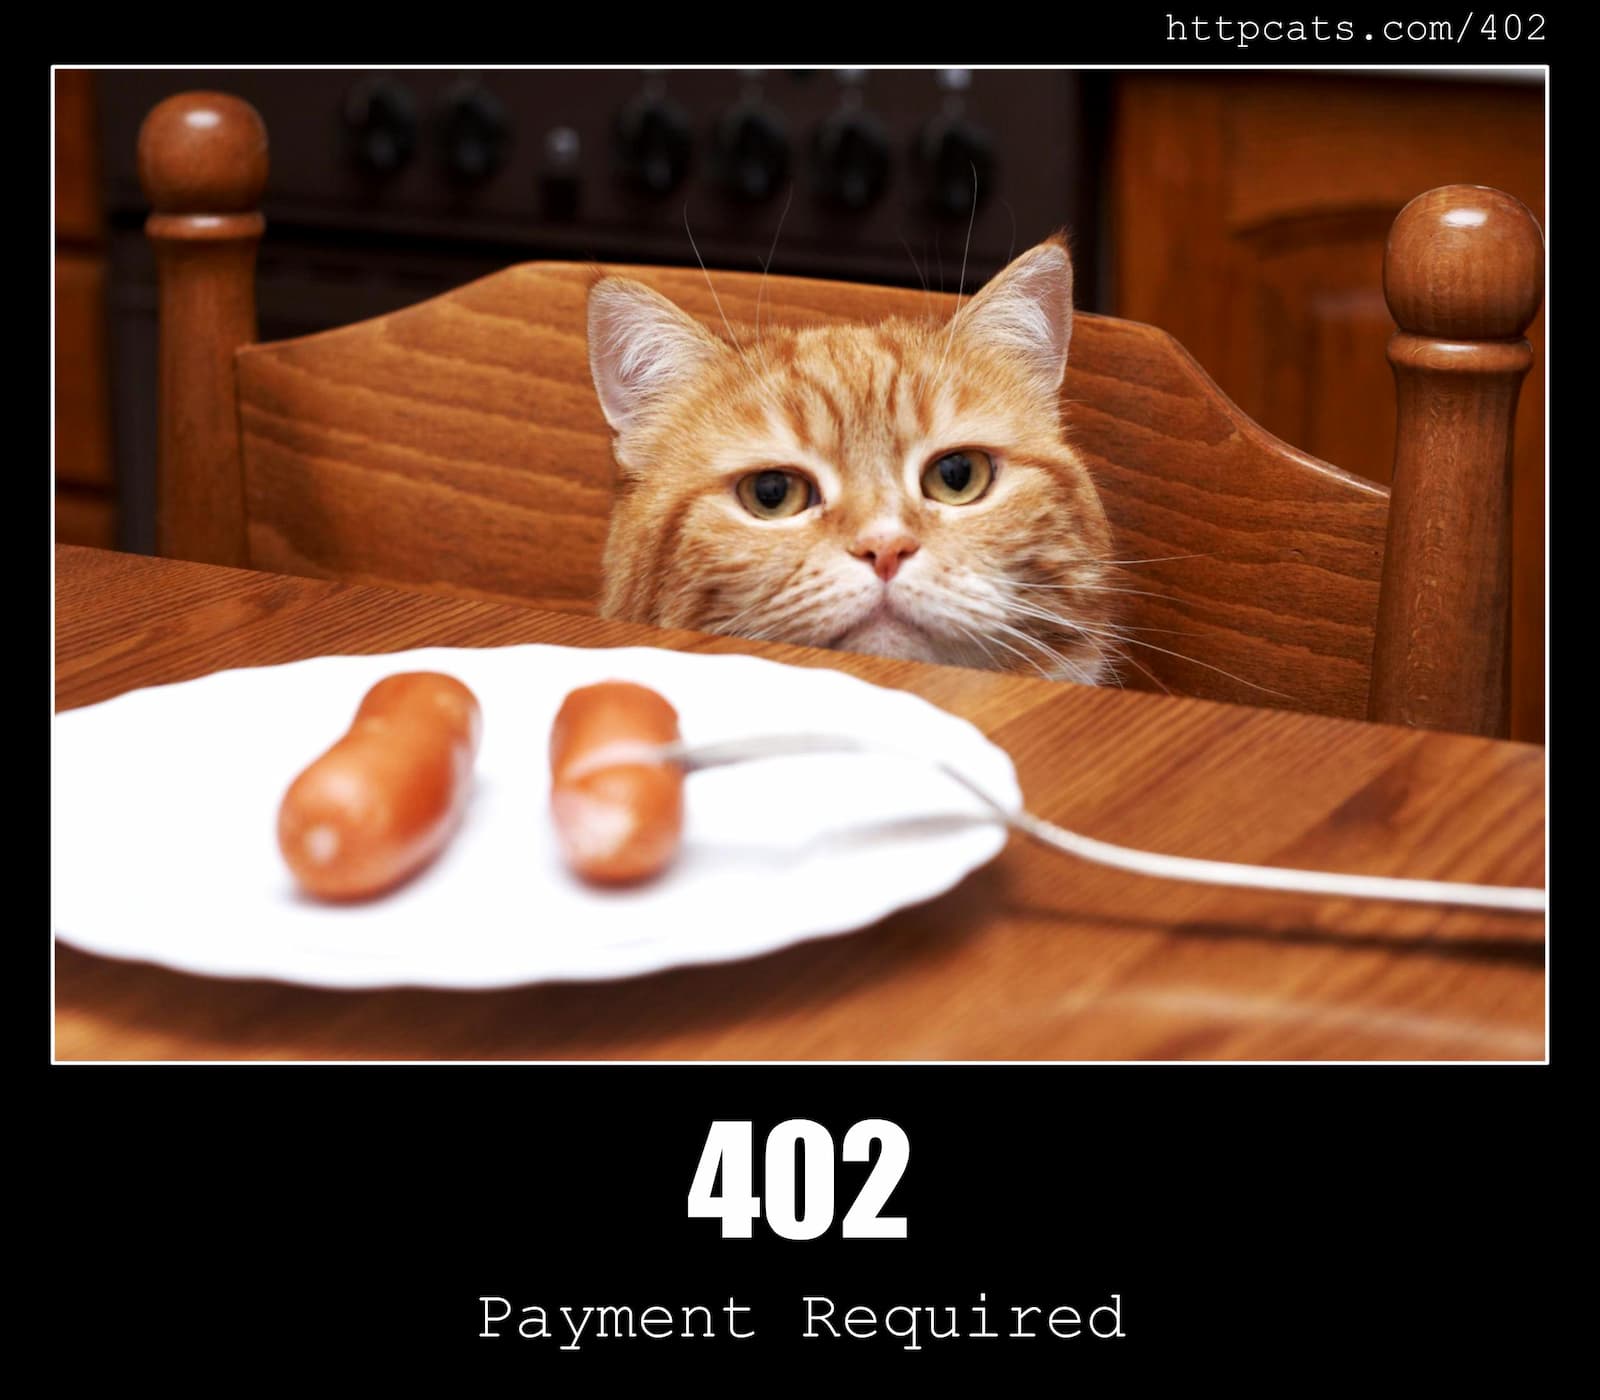 HTTP Status Code 402 Payment Required & Cats